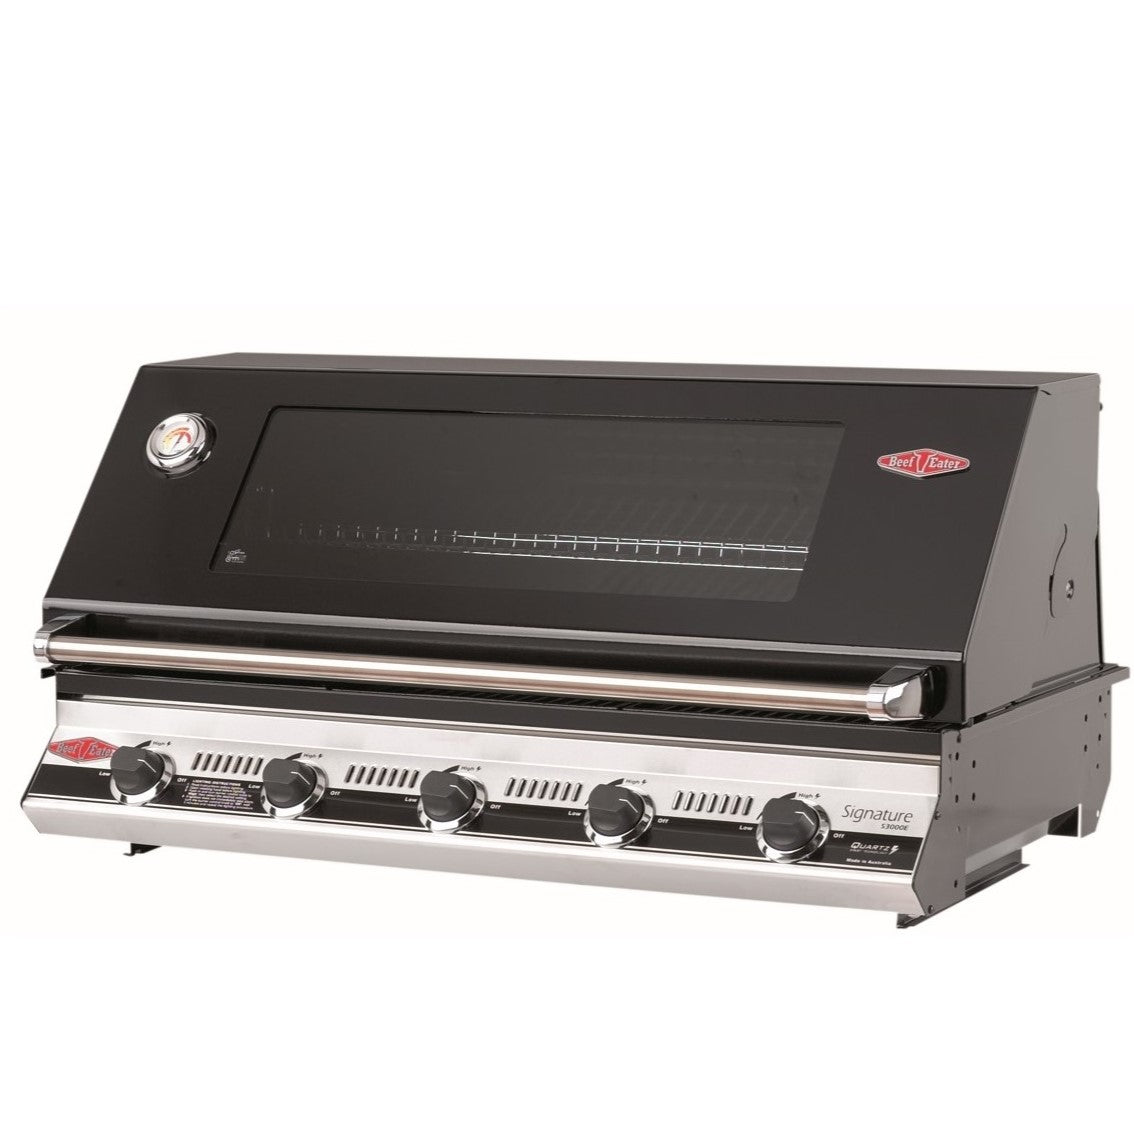 Beefeater Signature 3000E - Built in Gas BBQ Grill 5 Burner